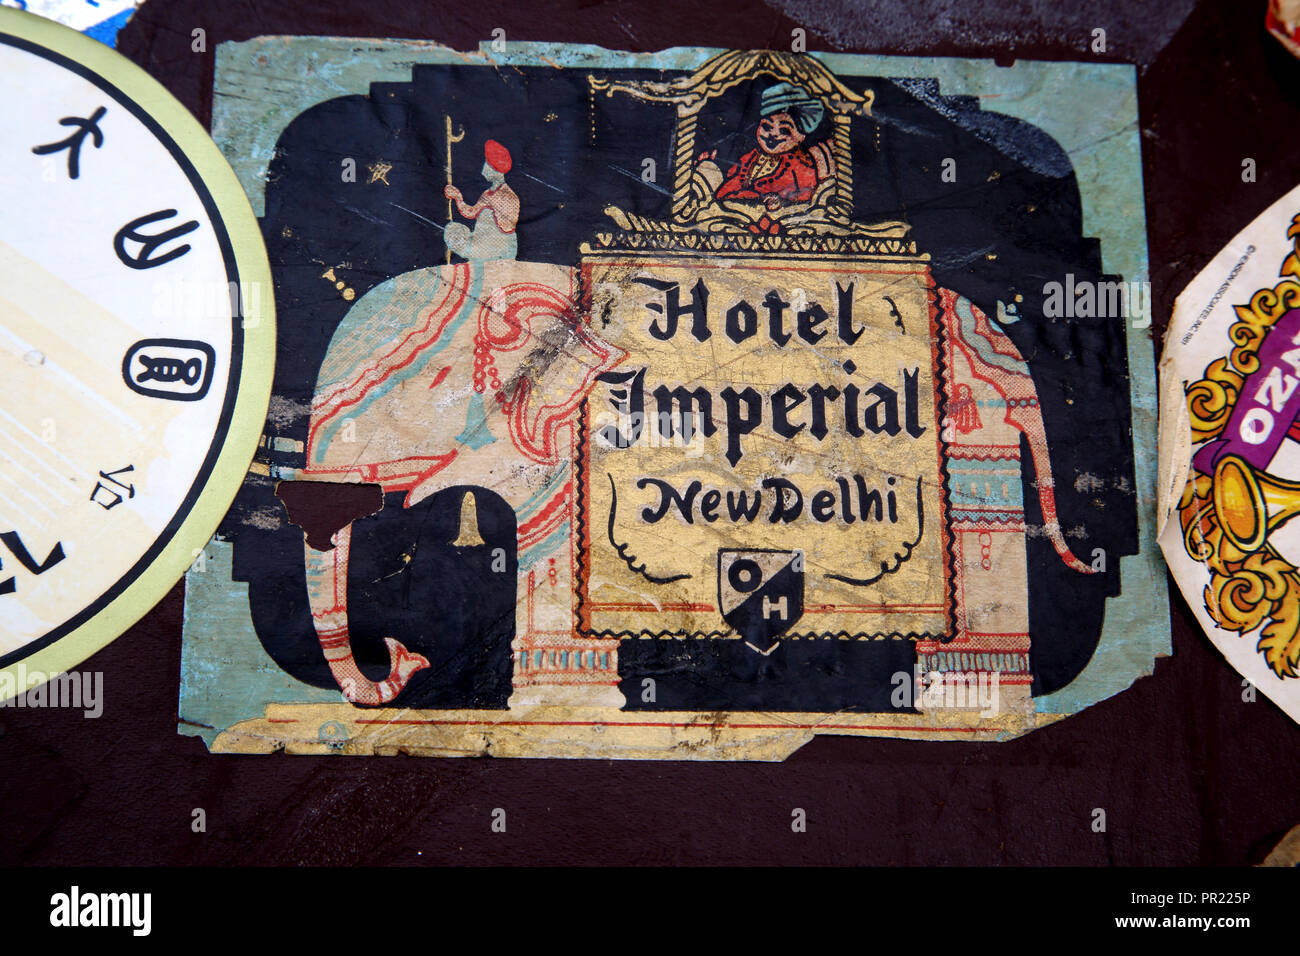 Vintage Leather Everlasta Suitcase with Travel Stickers - Hotel Imperial New Delhi Stock Photo